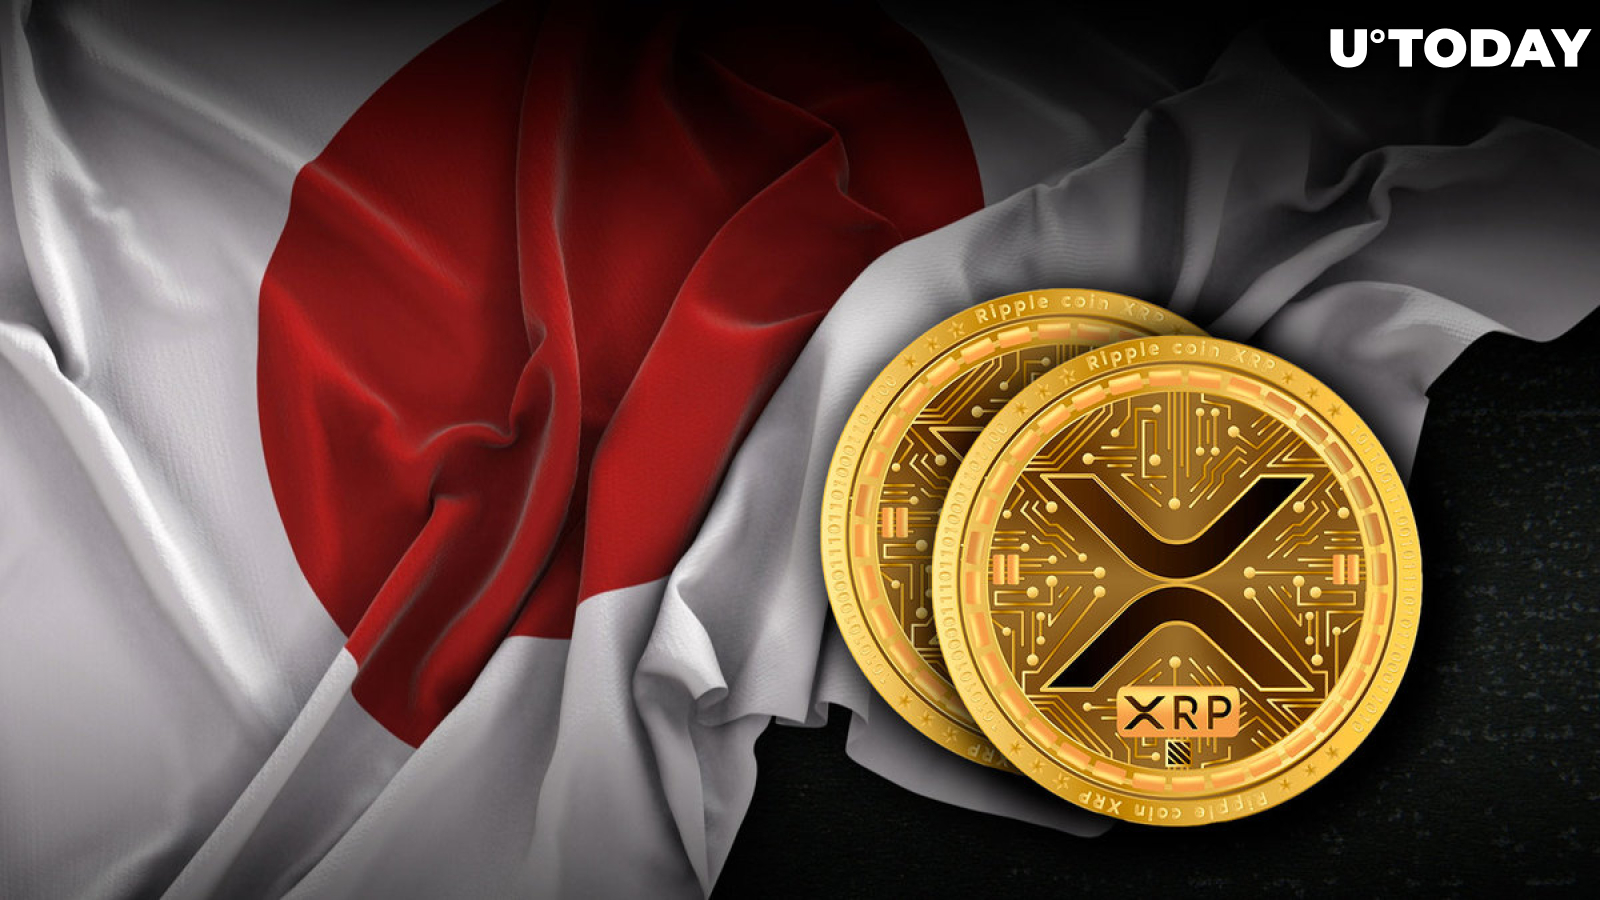 XRP Holders Get Special Offer from Japanese IT Behemoth